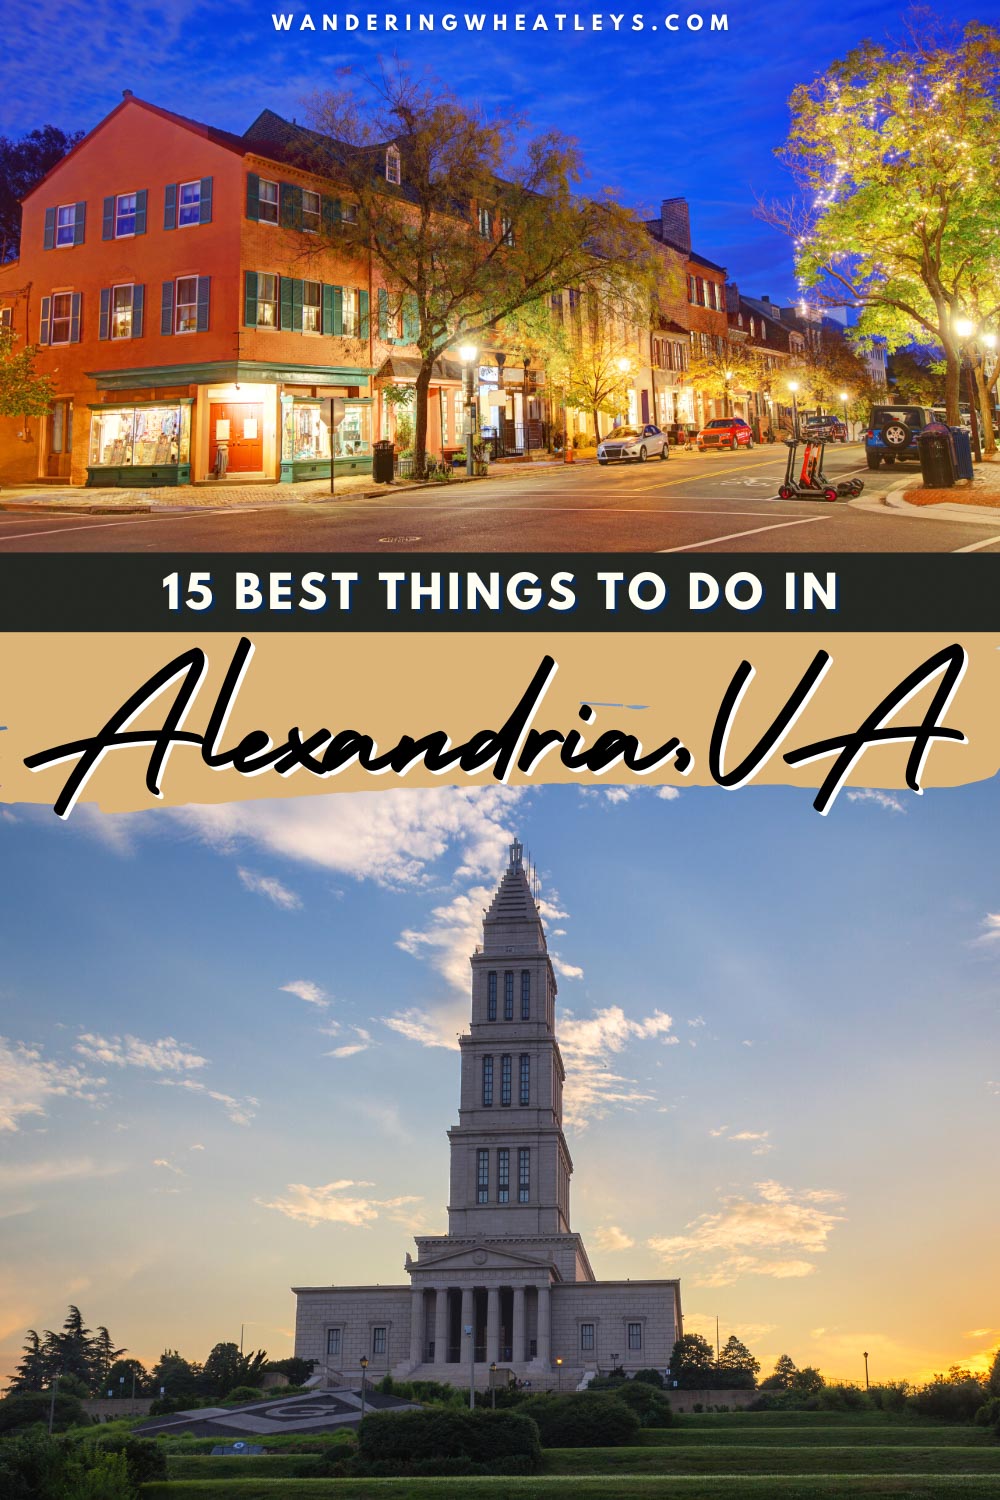 The Best Things to do in Alexandria, VA